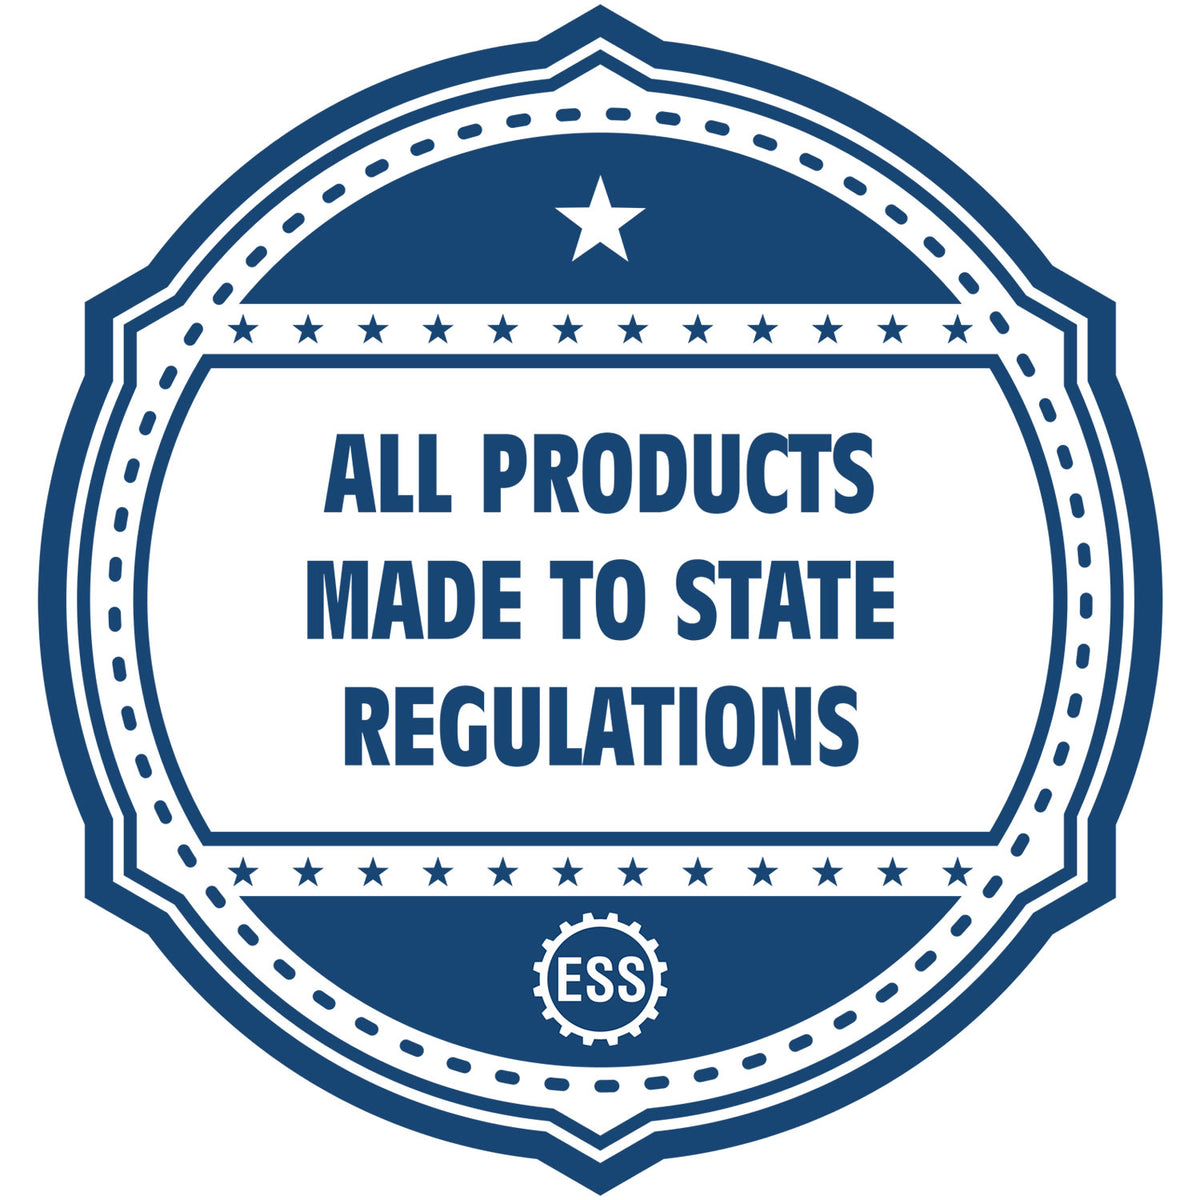 An icon or badge element for the Rhode Island Landscape Architectural Seal Stamp showing that this product is made in compliance with state regulations.